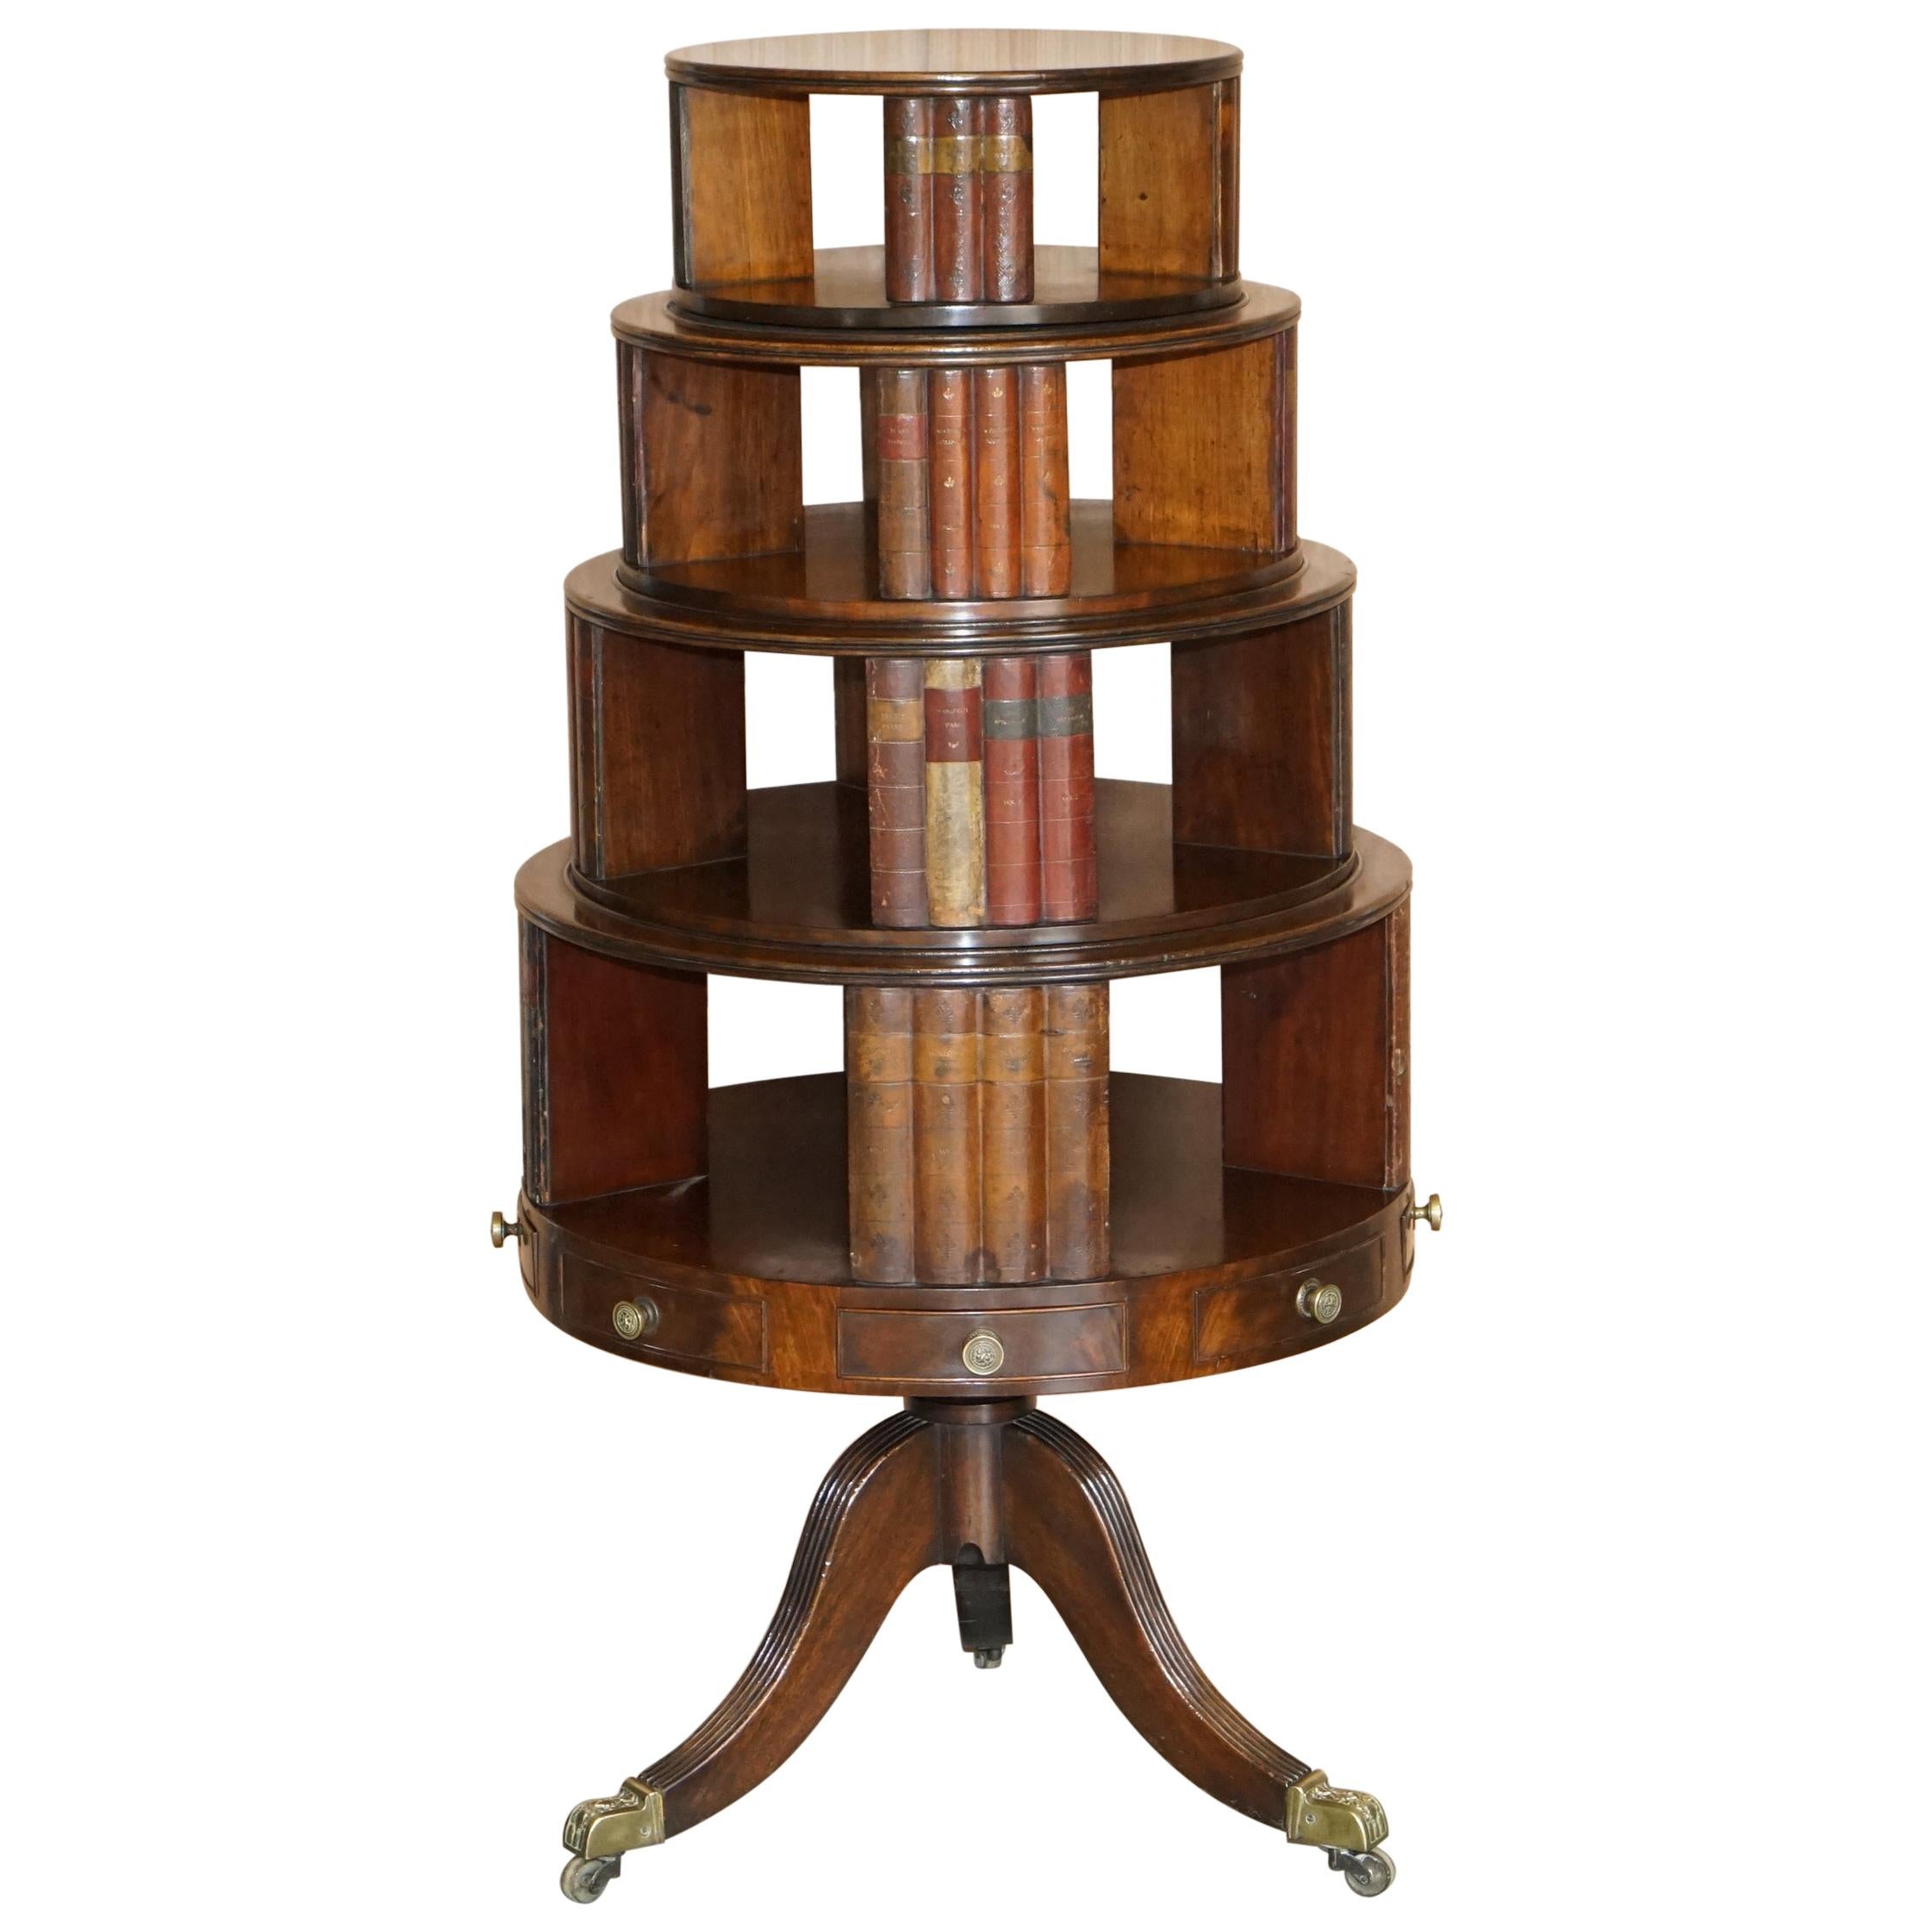 Restored Regency circa 1810 Revolving Hardwood Library Bookcase with Faux Books